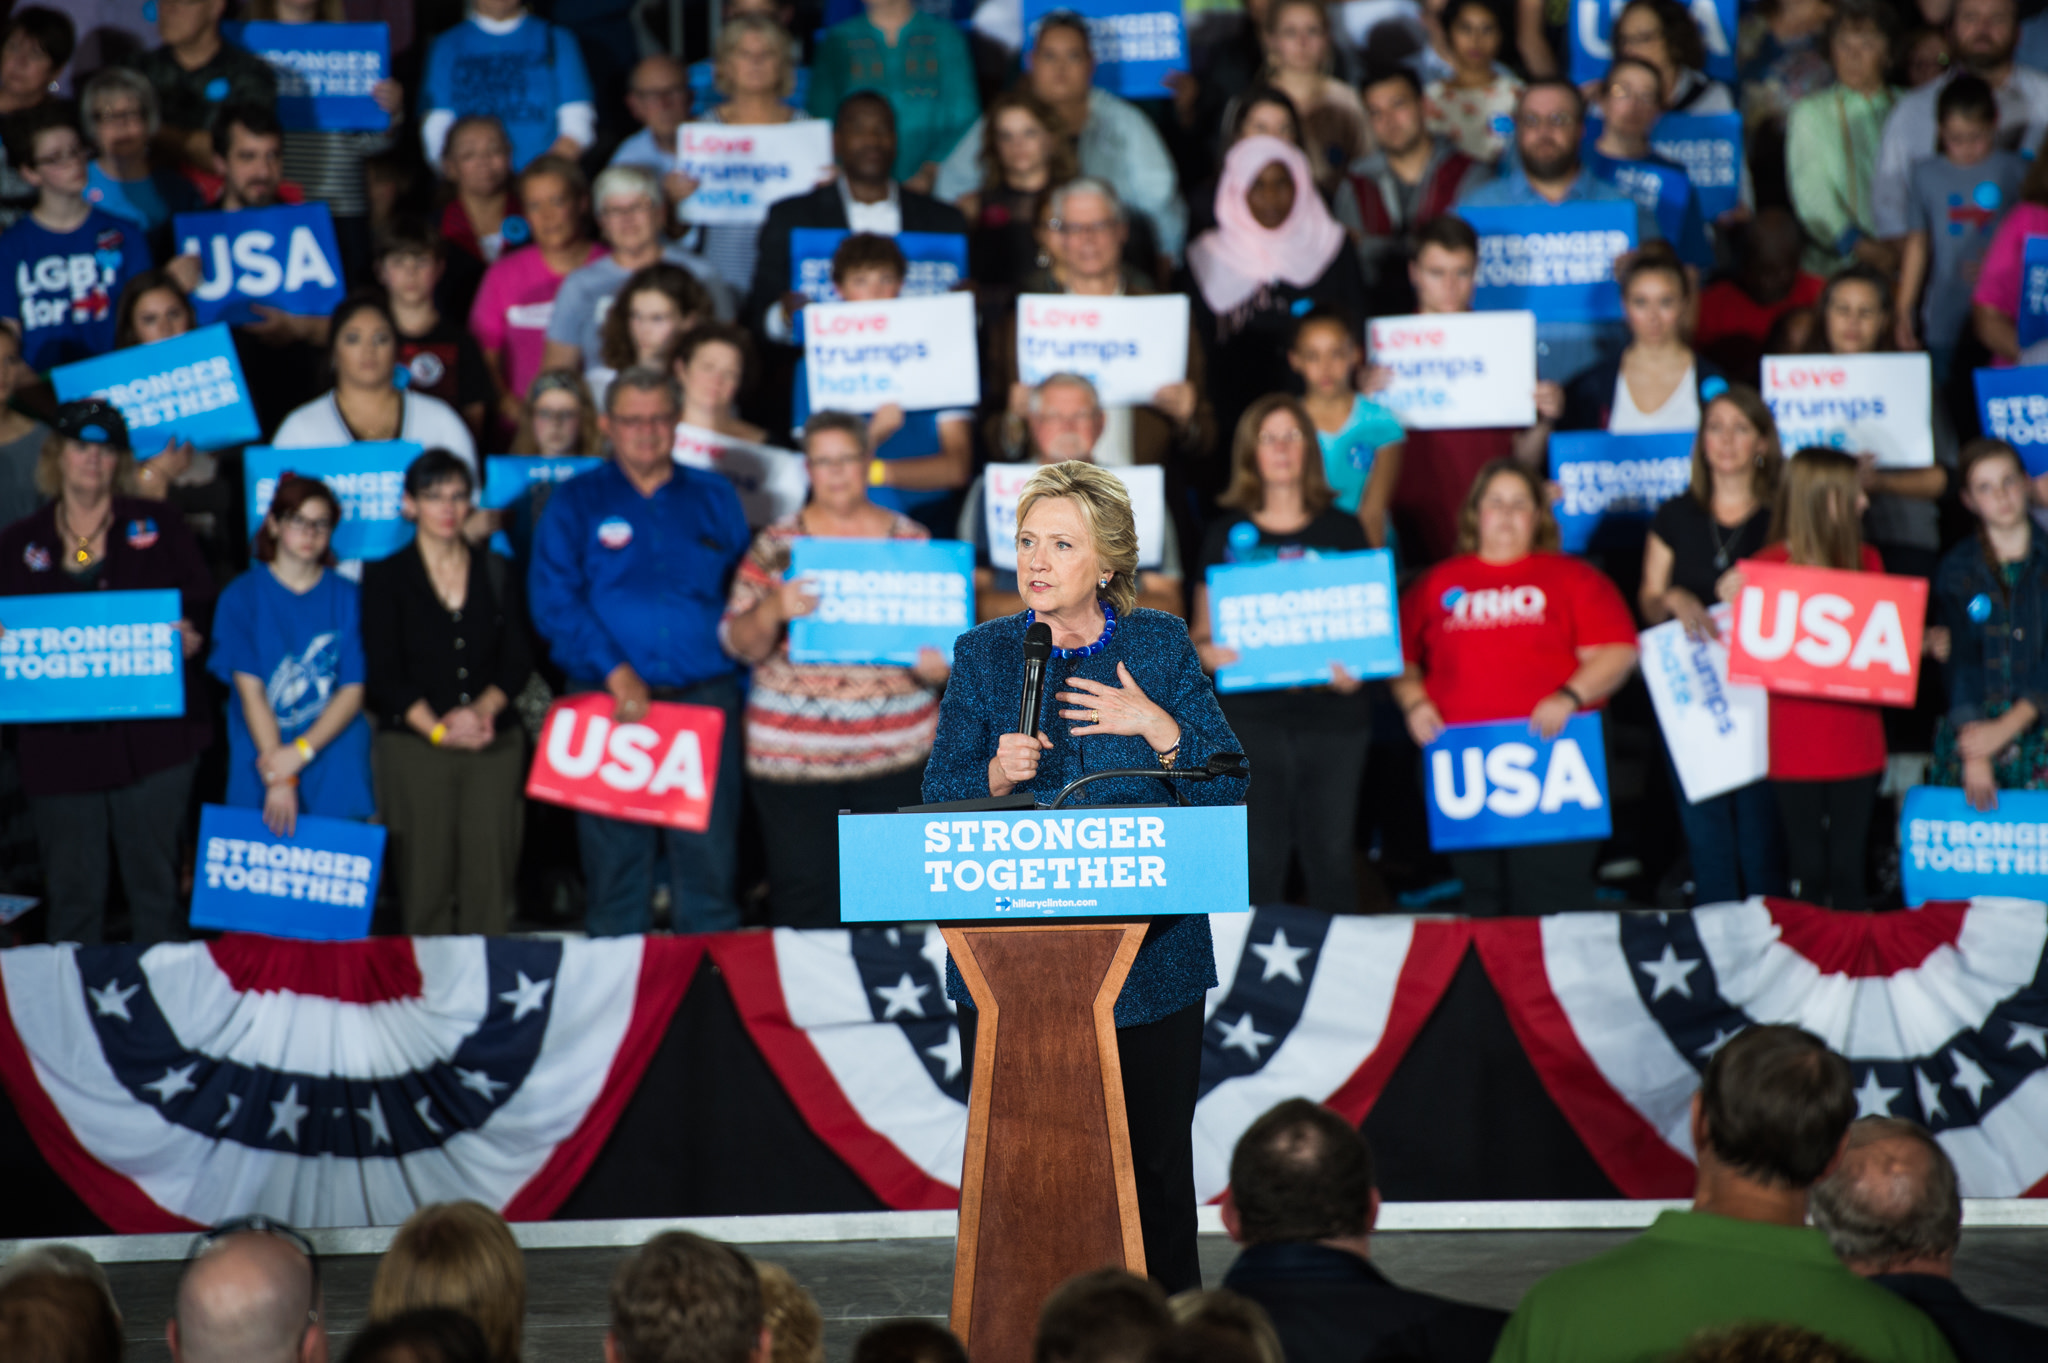 Hillary Clinton at a podium speaking at a rally.